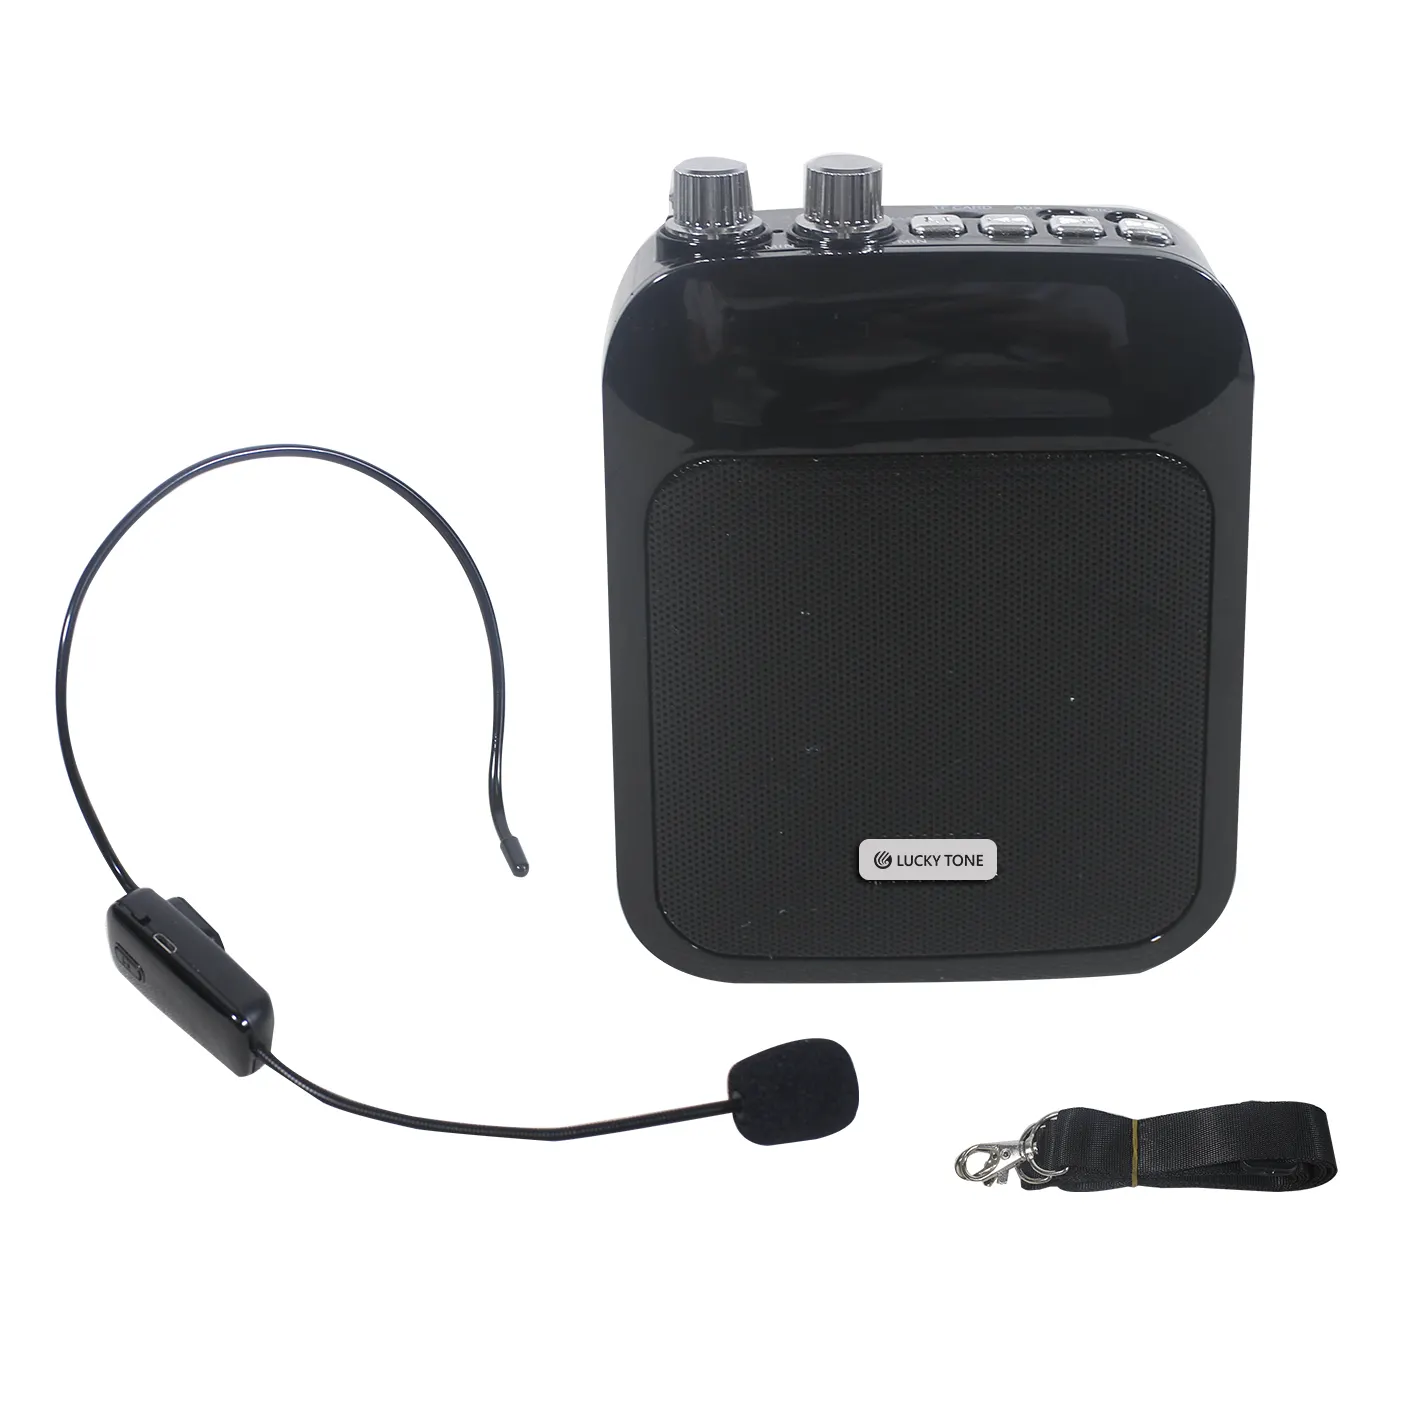 T Waist-hanging Portable Waist Speaker With 9W Amplifier Head Micro Ideal Speaker For Teachers,Guides,Presenters